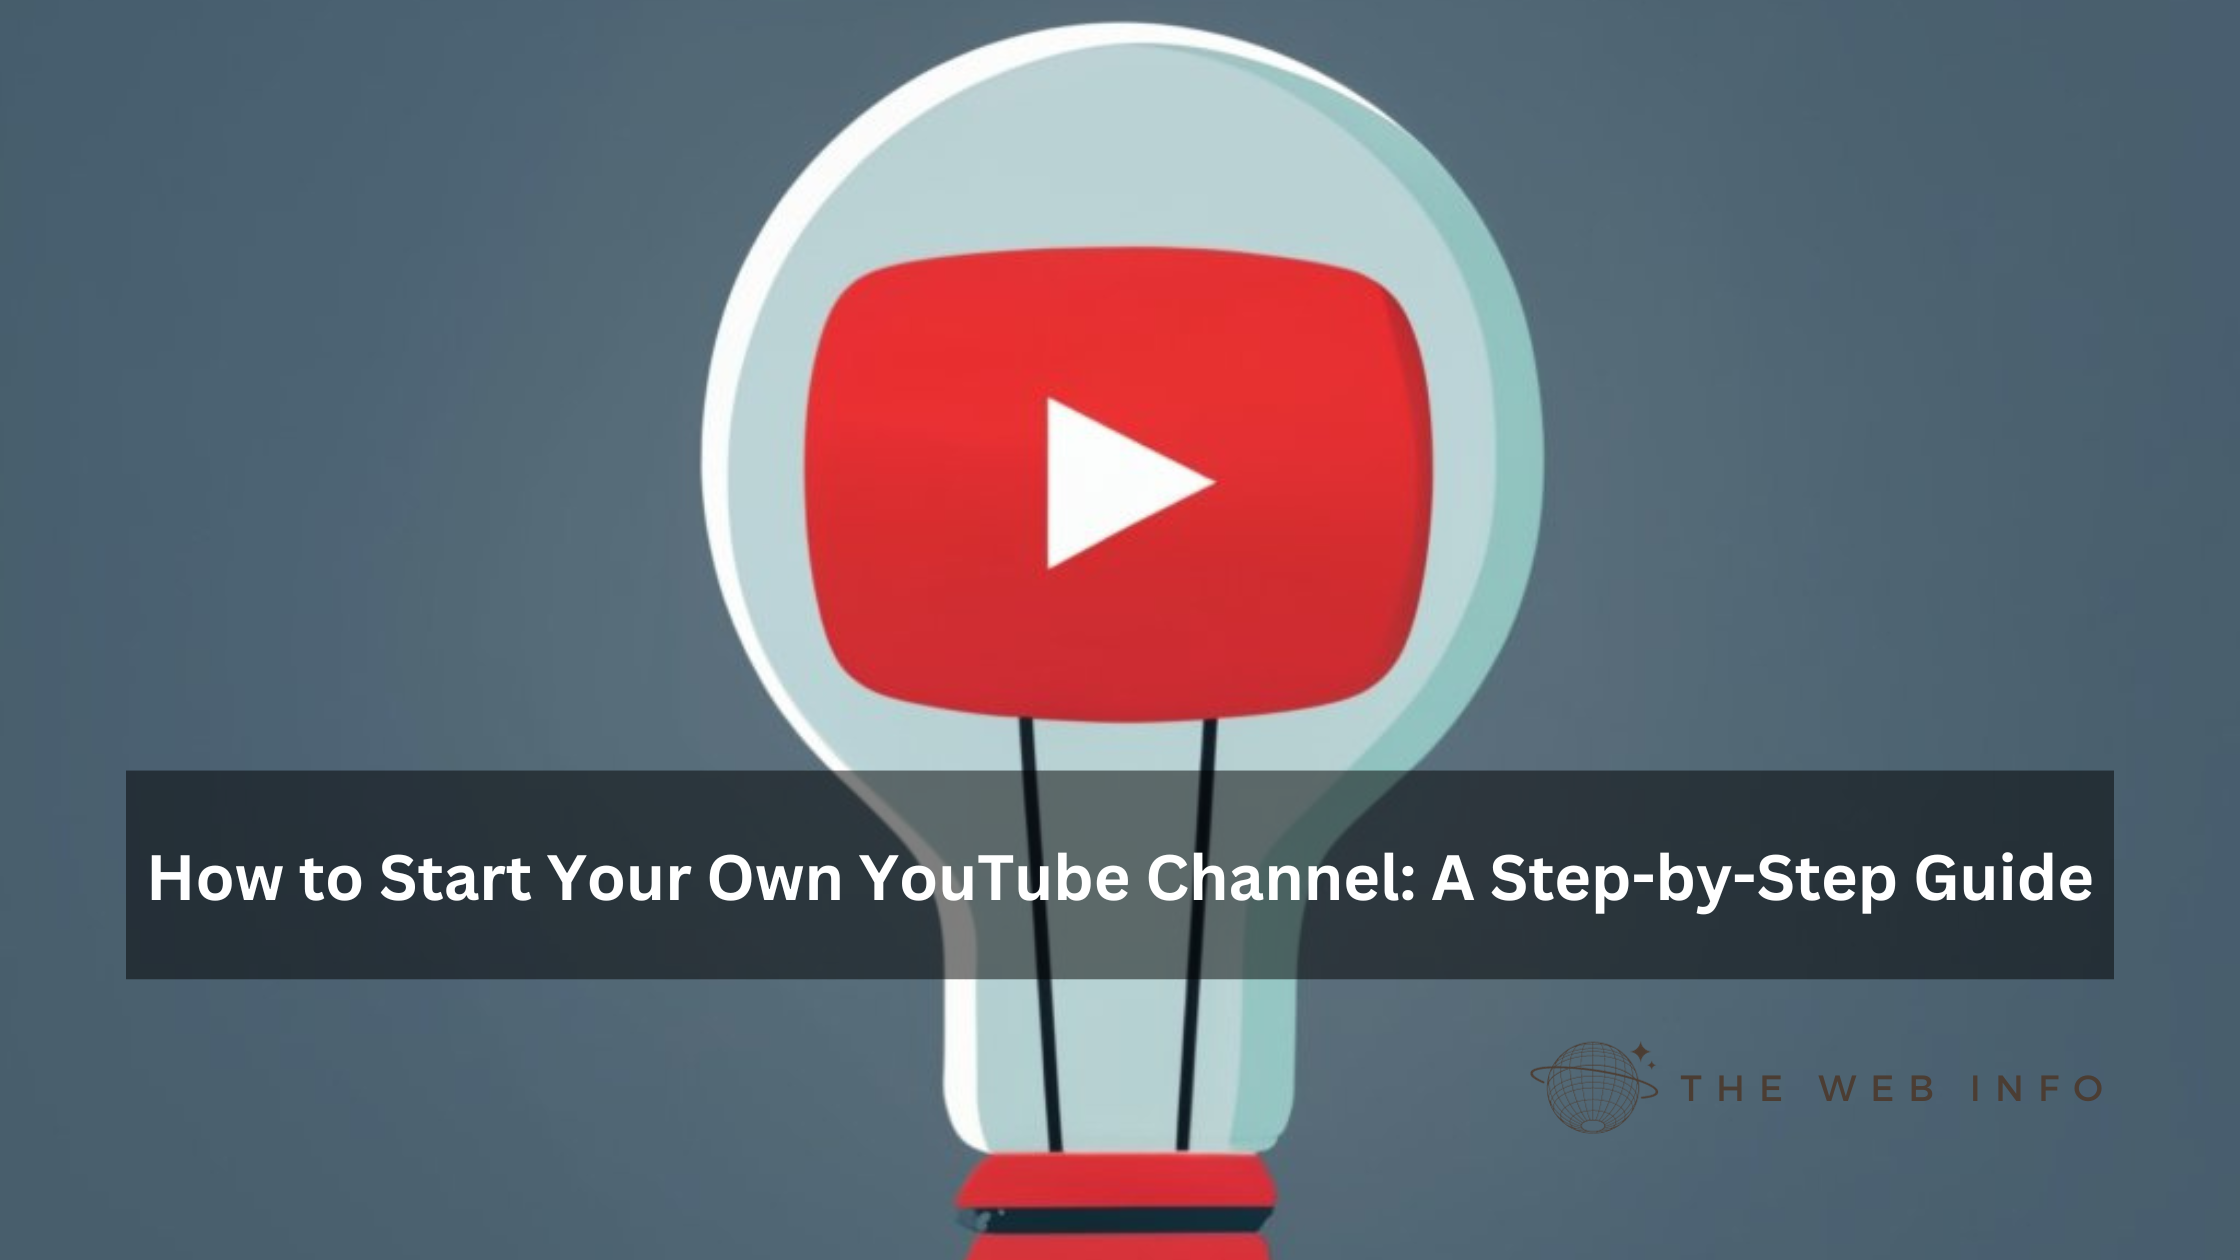 How to Start Your Own YouTube Channel: A Step-by-Step Guide